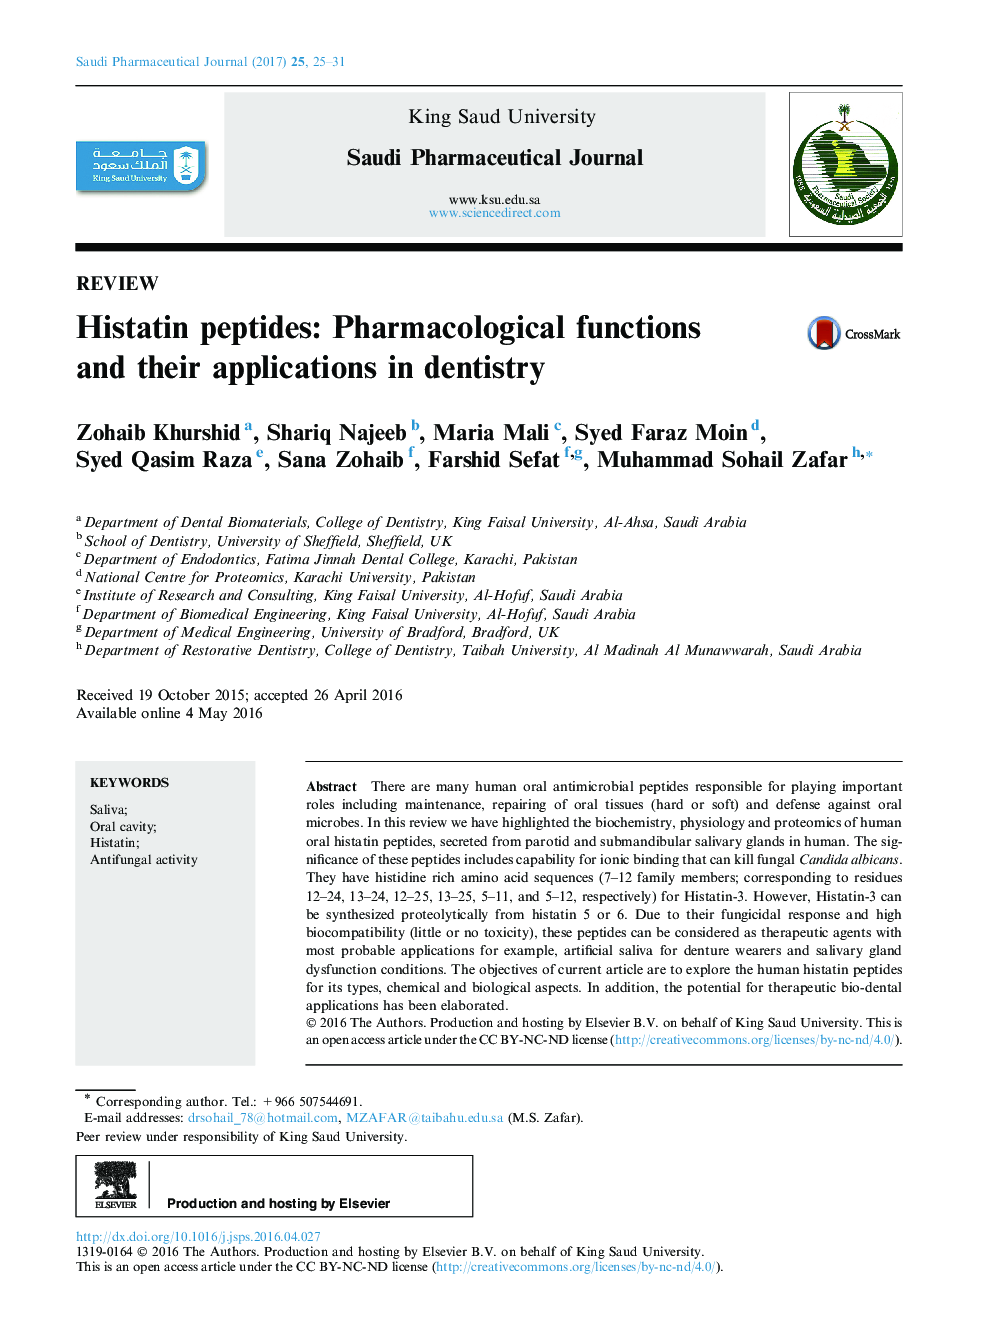 Histatin peptides: Pharmacological functions and their applications in dentistry